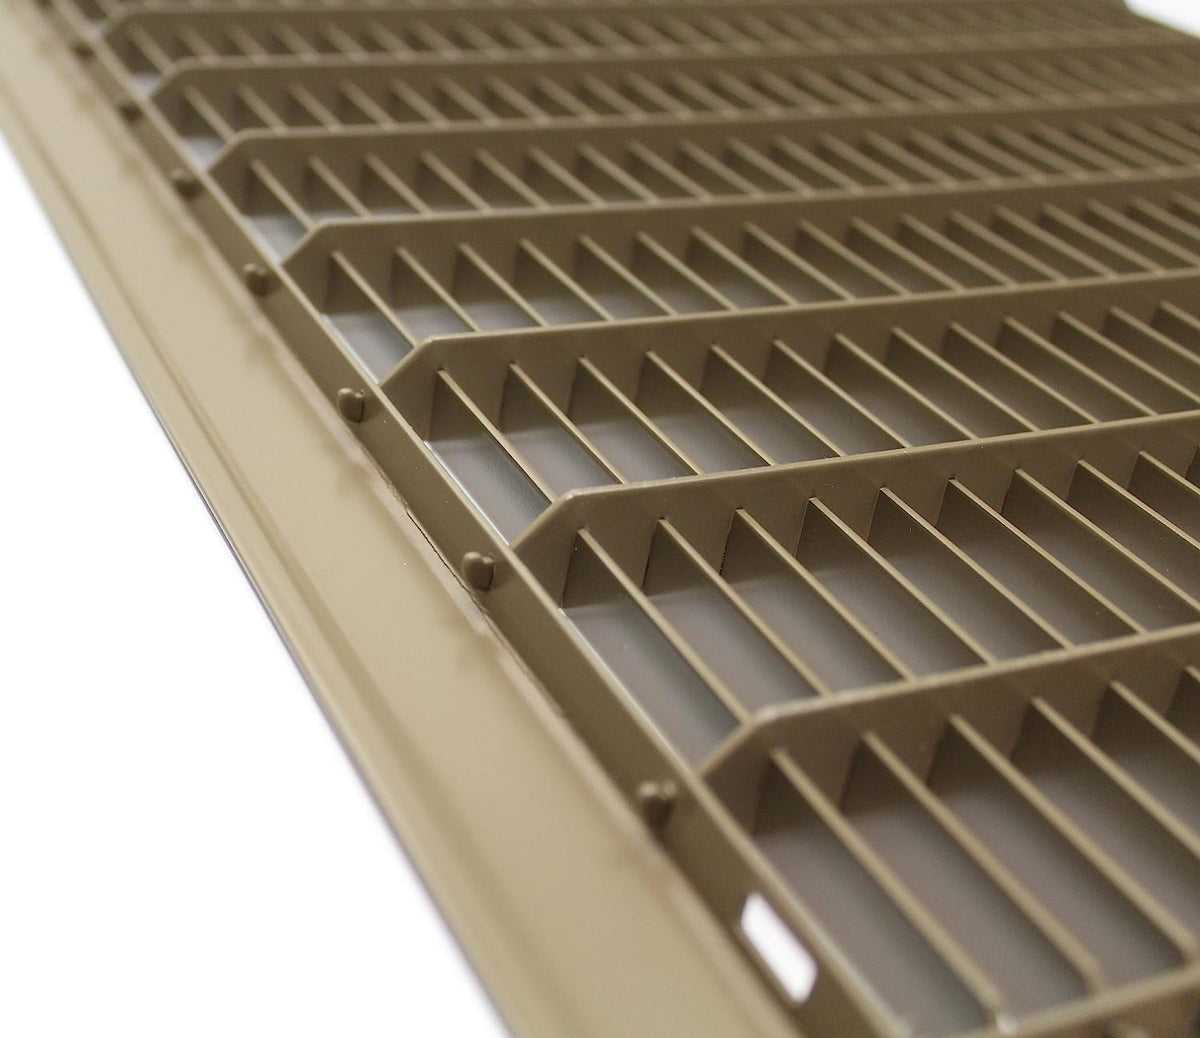 10&quot; X 20&quot; or 20&quot; X 10&quot; Heavy Duty Floor Grille - Fixed Blades Air Grille - Brown [Outer Dimensions: 11.75 X 21.75]